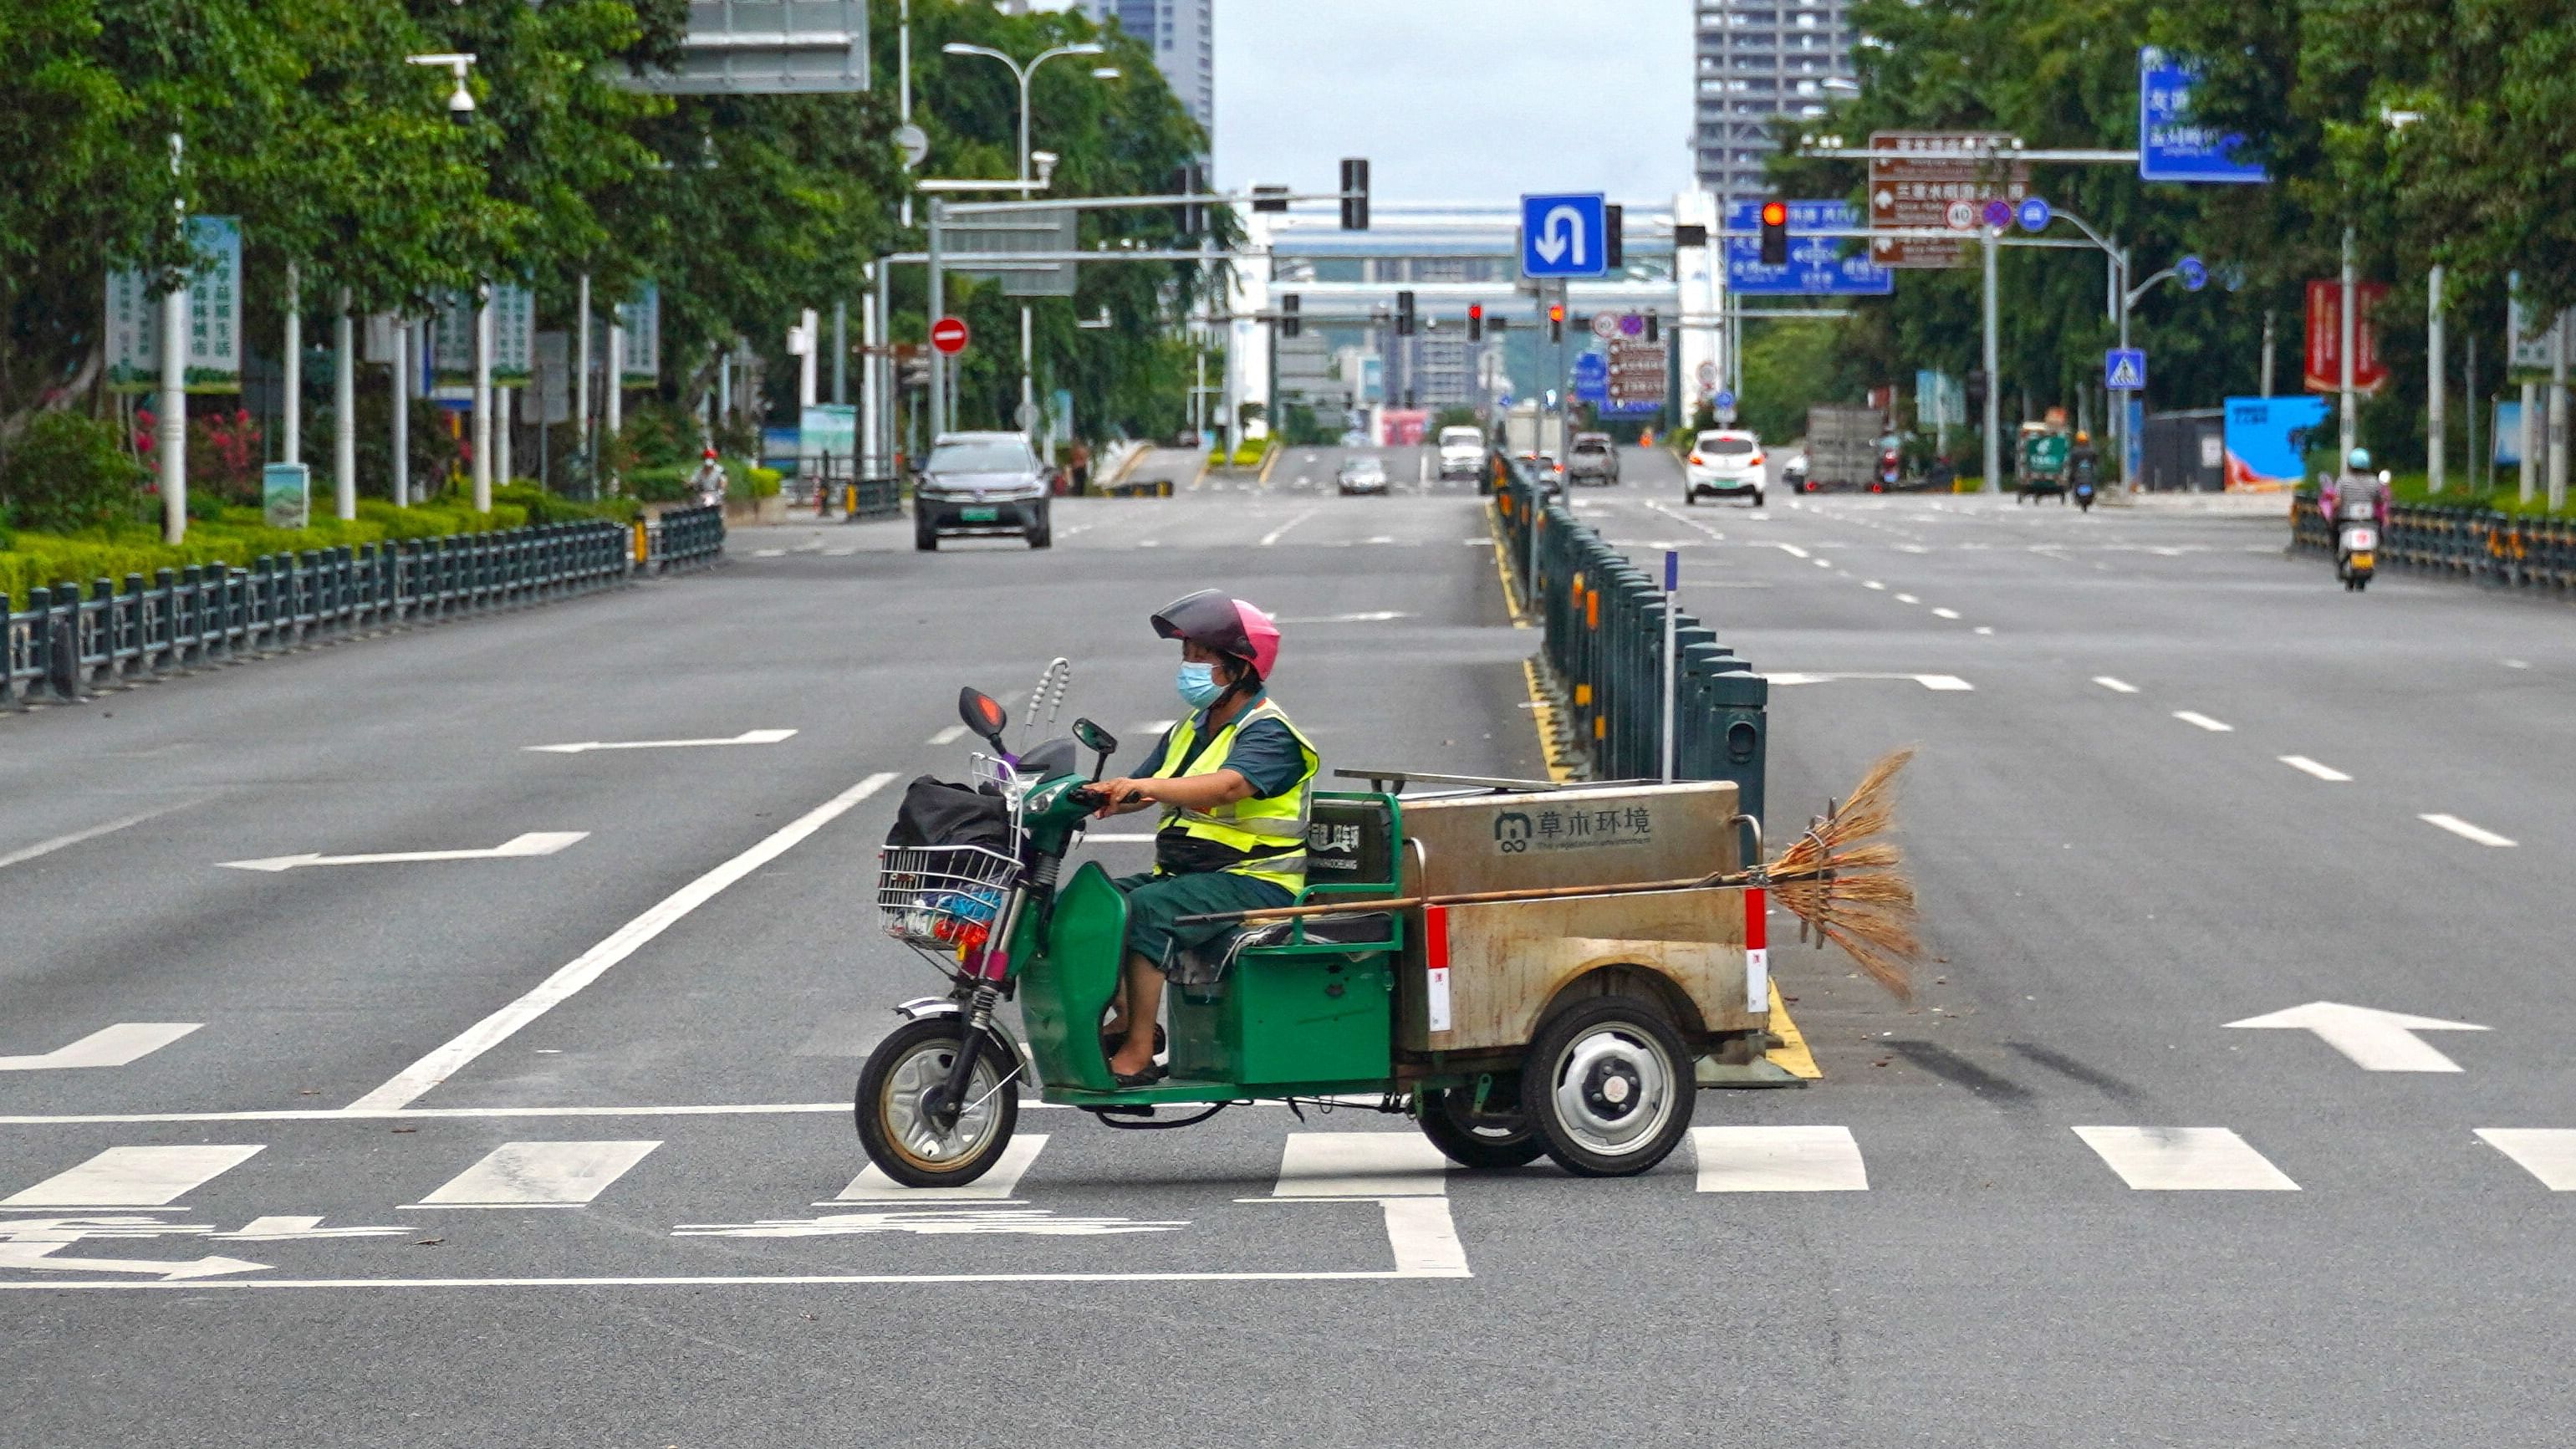 A sanitation worker drives past an intersection amid lockdown measures to curb the coronavirus disease (Covid-19) outbreak in Sanya, Hainan province, China. Credit: Reuters Photo